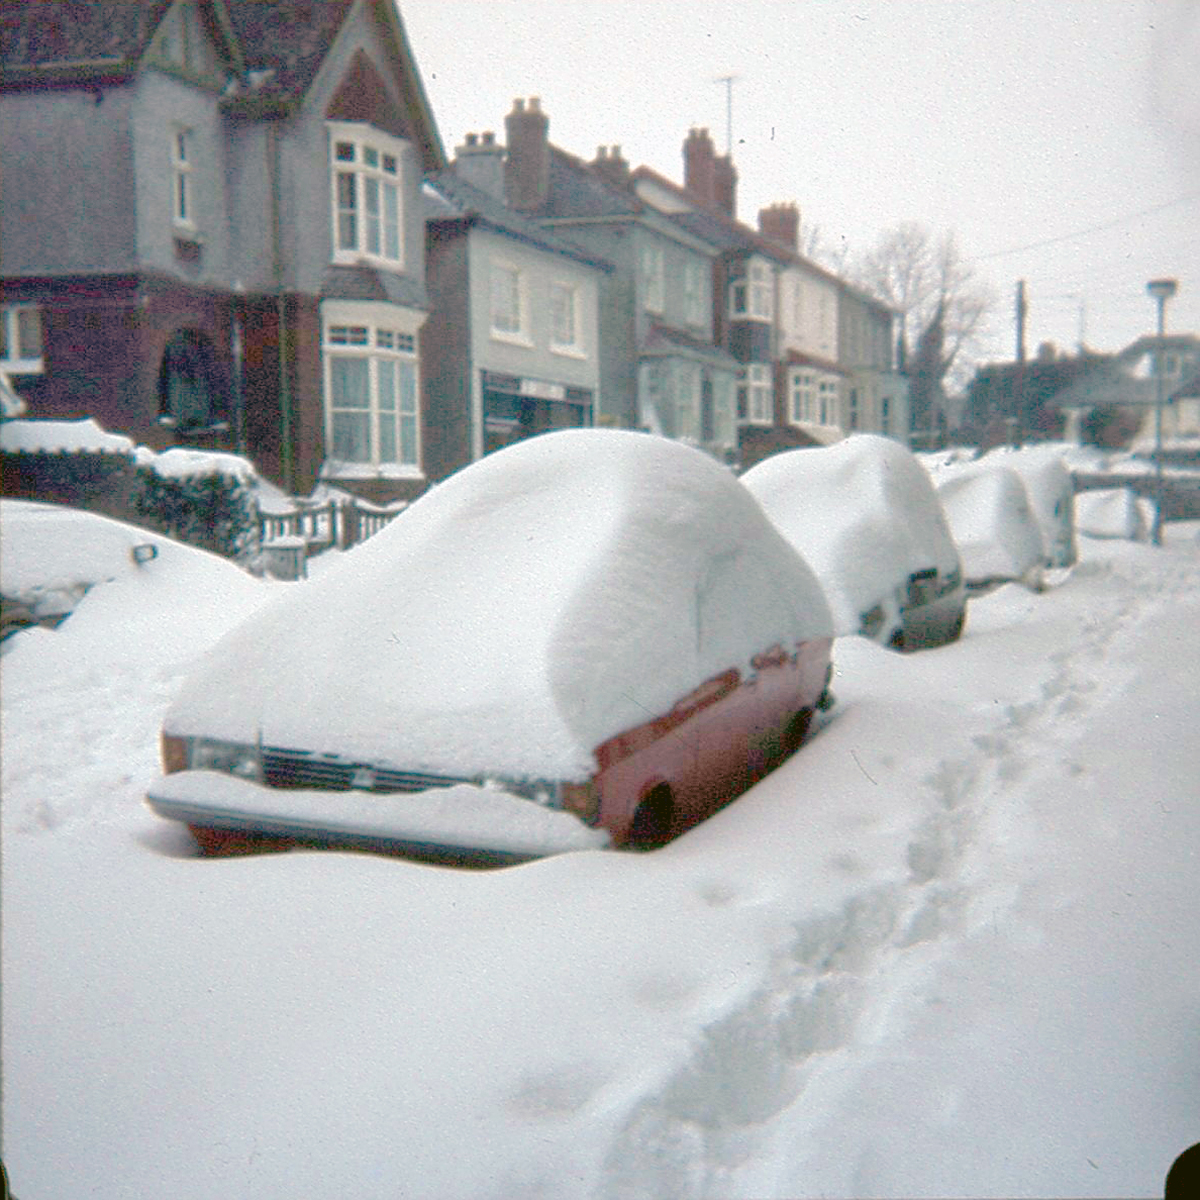 A red car at the forefront of the photograph covered in snow, followed by a line of cars seemingly parked outside a row of houses (also covered in snow).